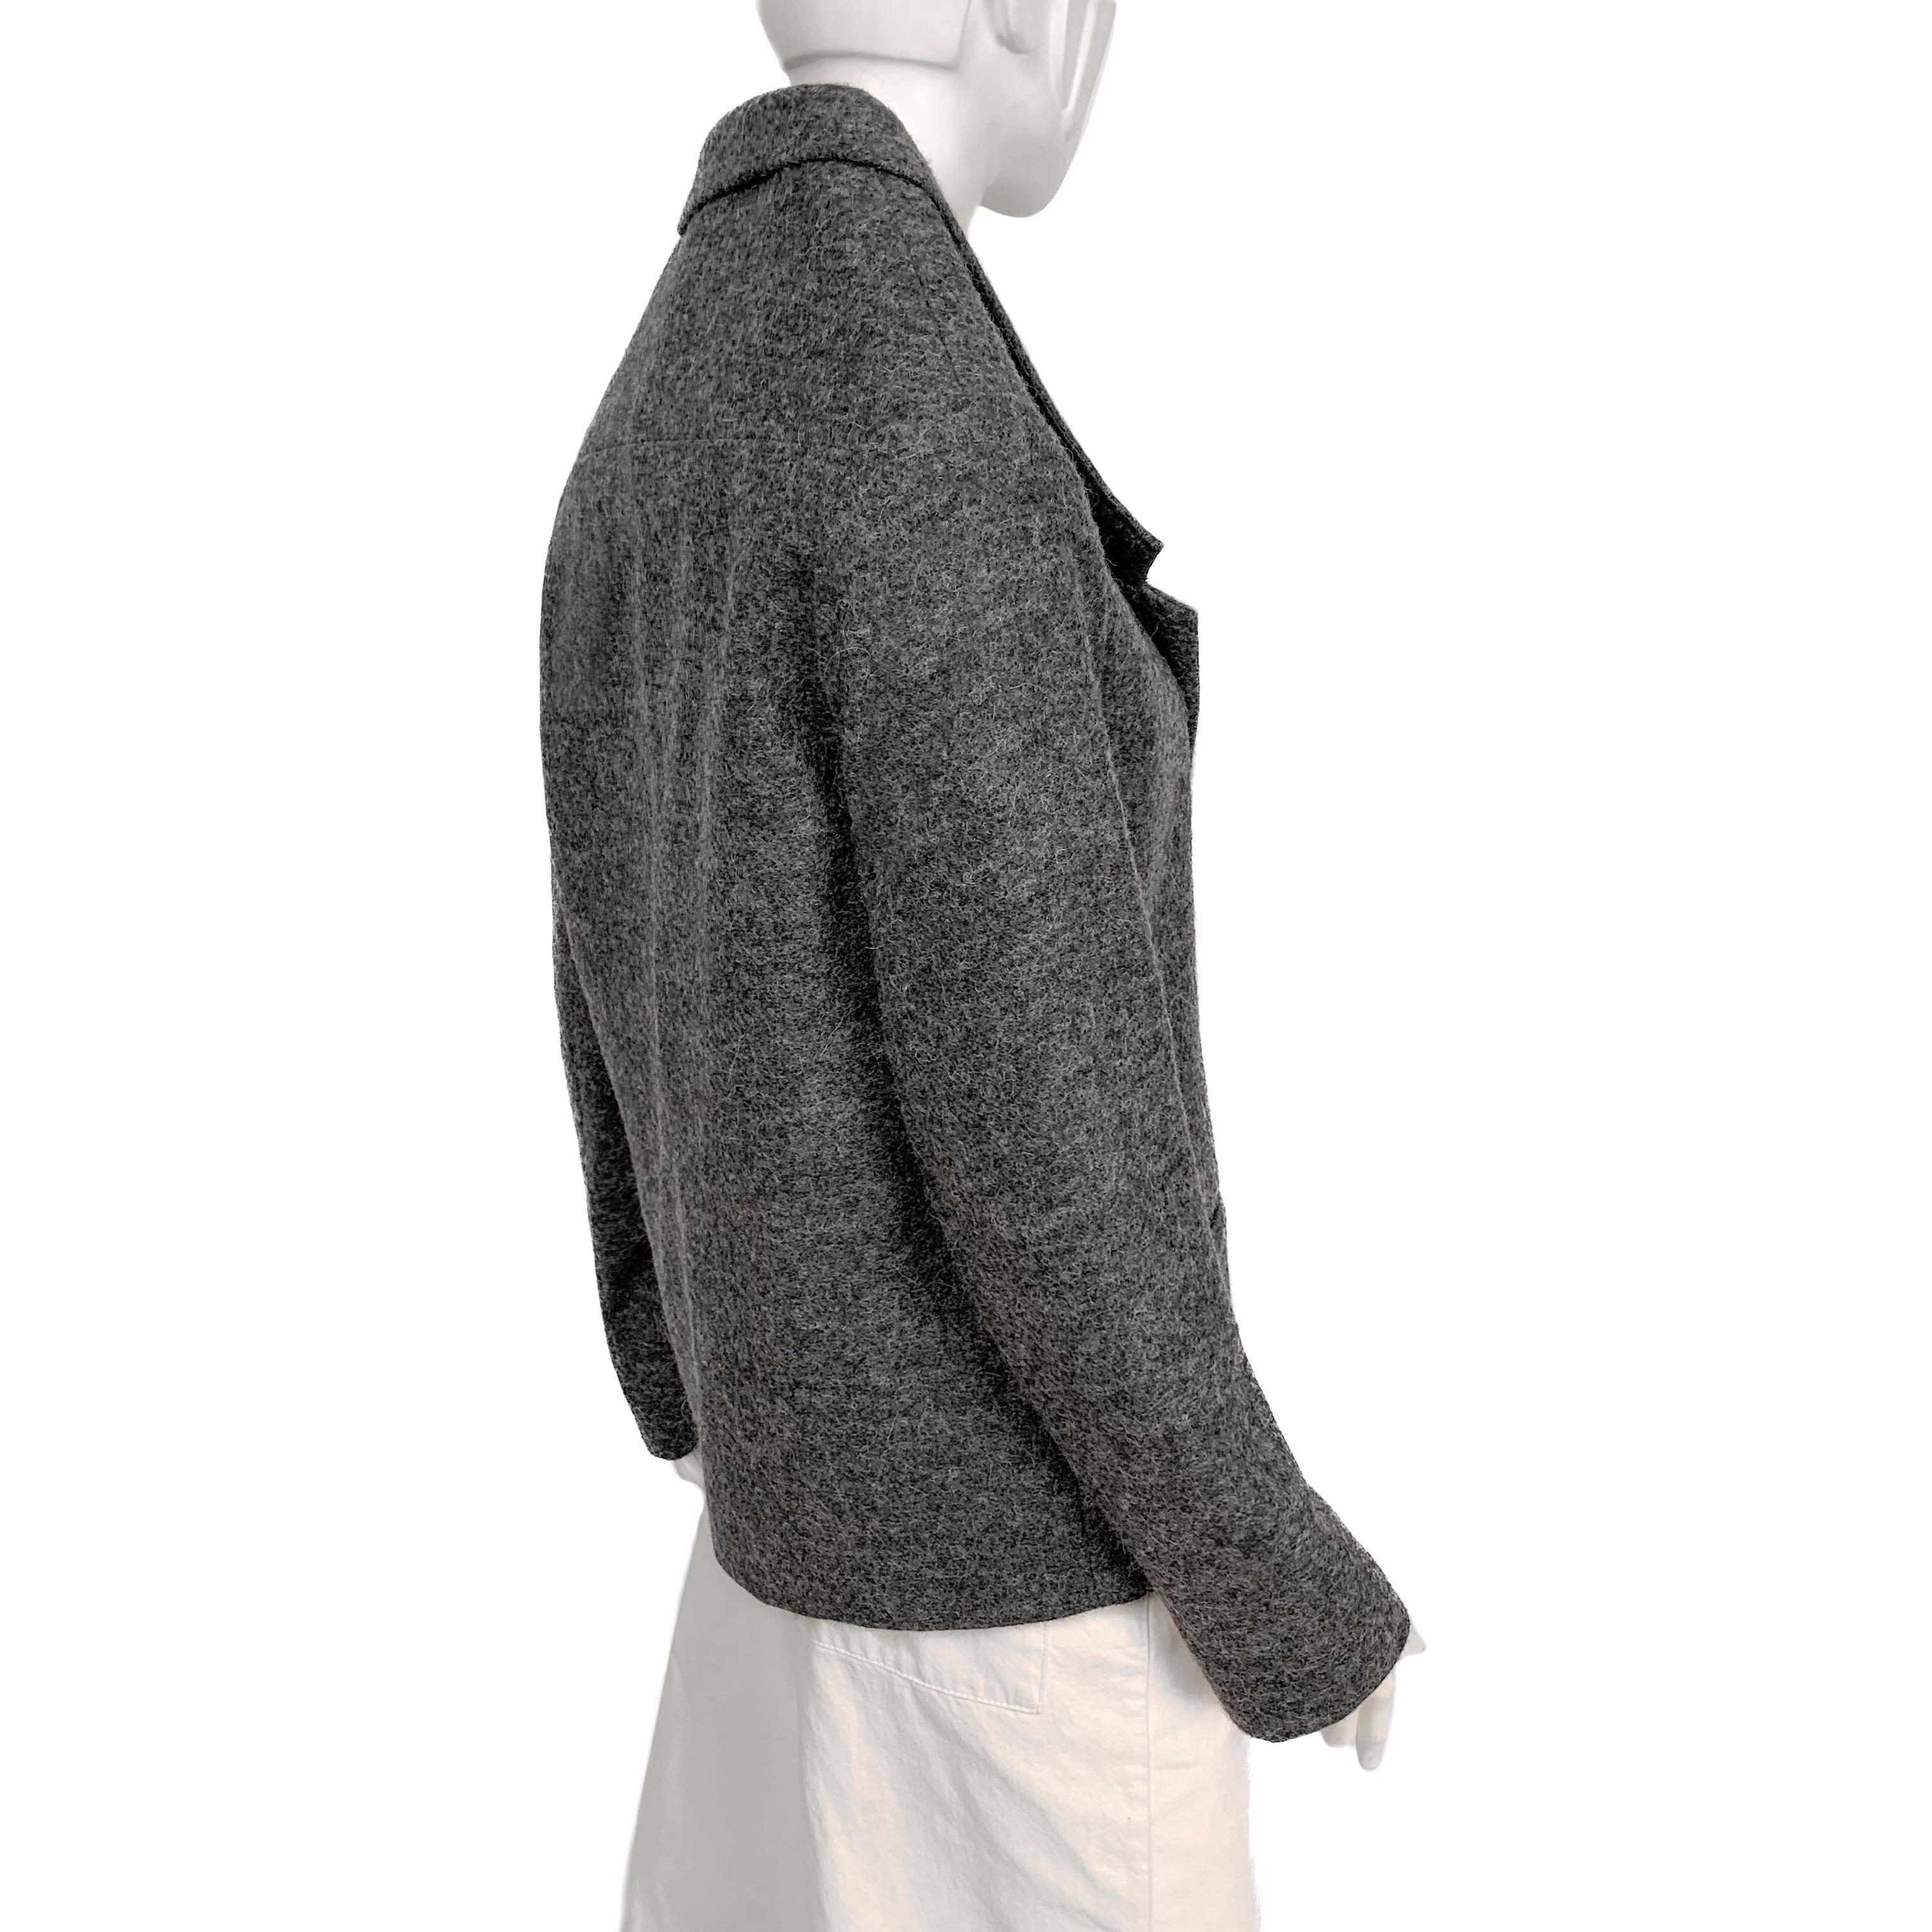 AW 2010 mr. Margiela's last RTW collection grey wool deconstructed blazer For Sale 2